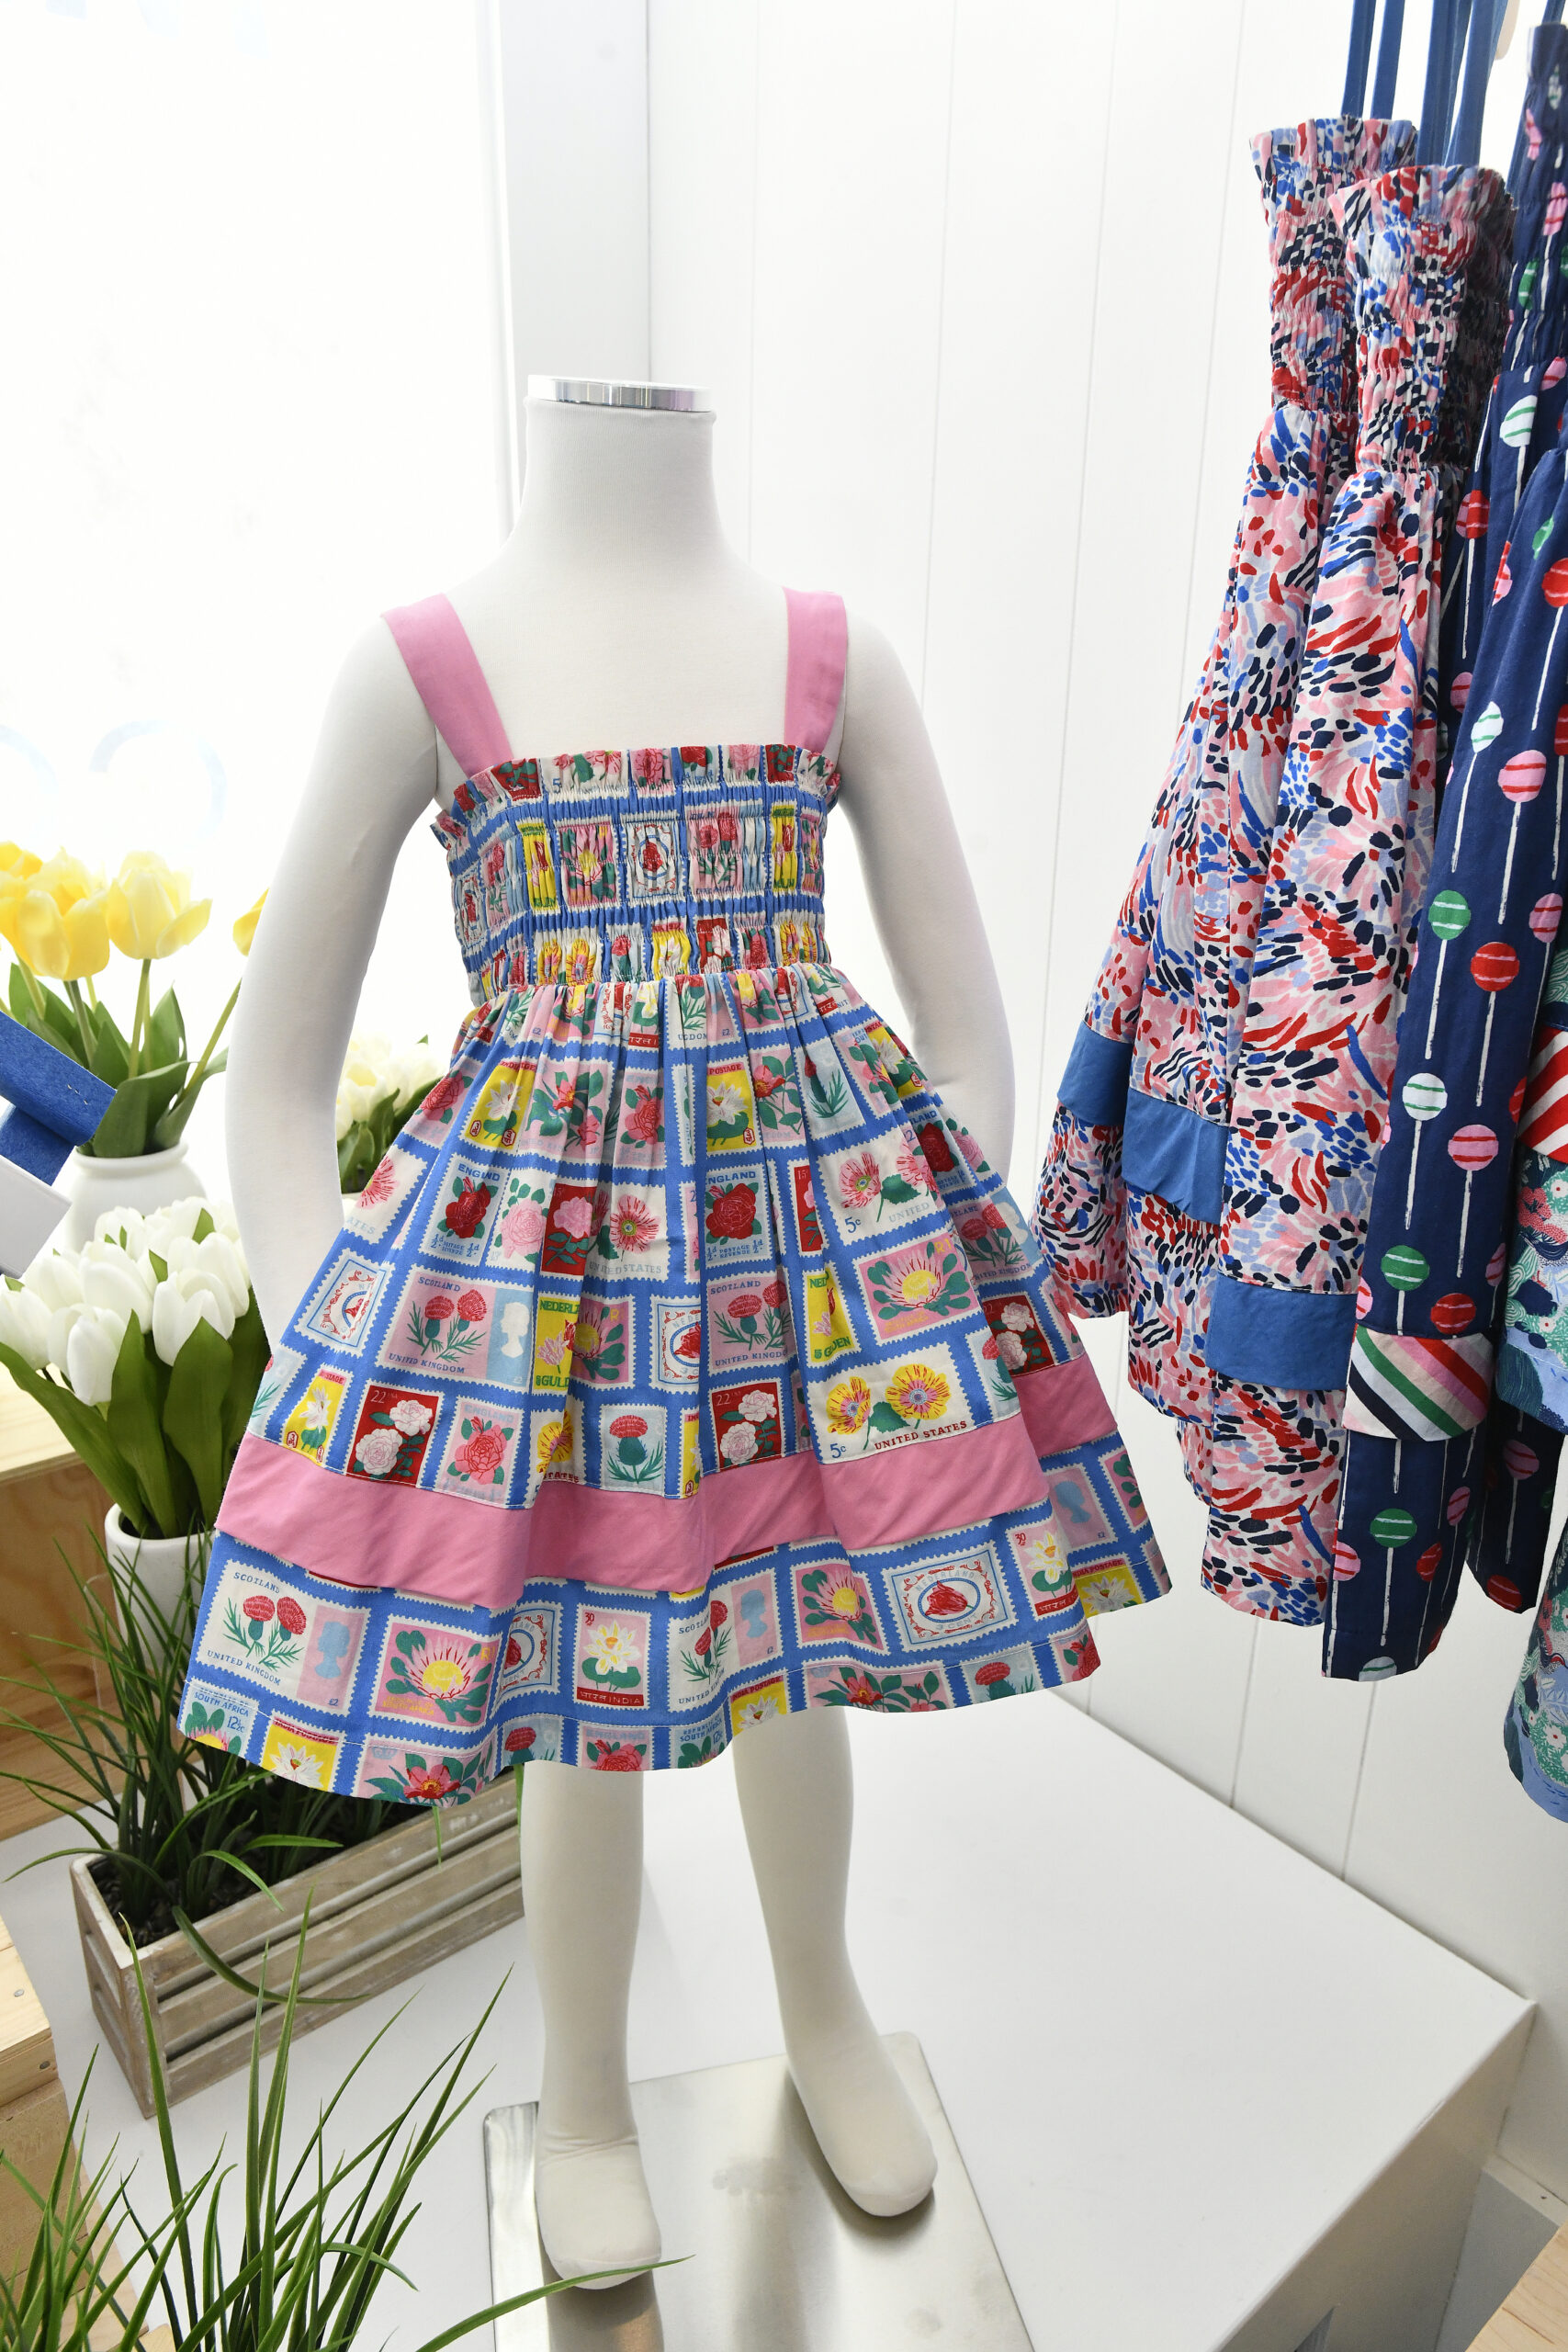 Making Sustainability A Priority In Children’s Fashion